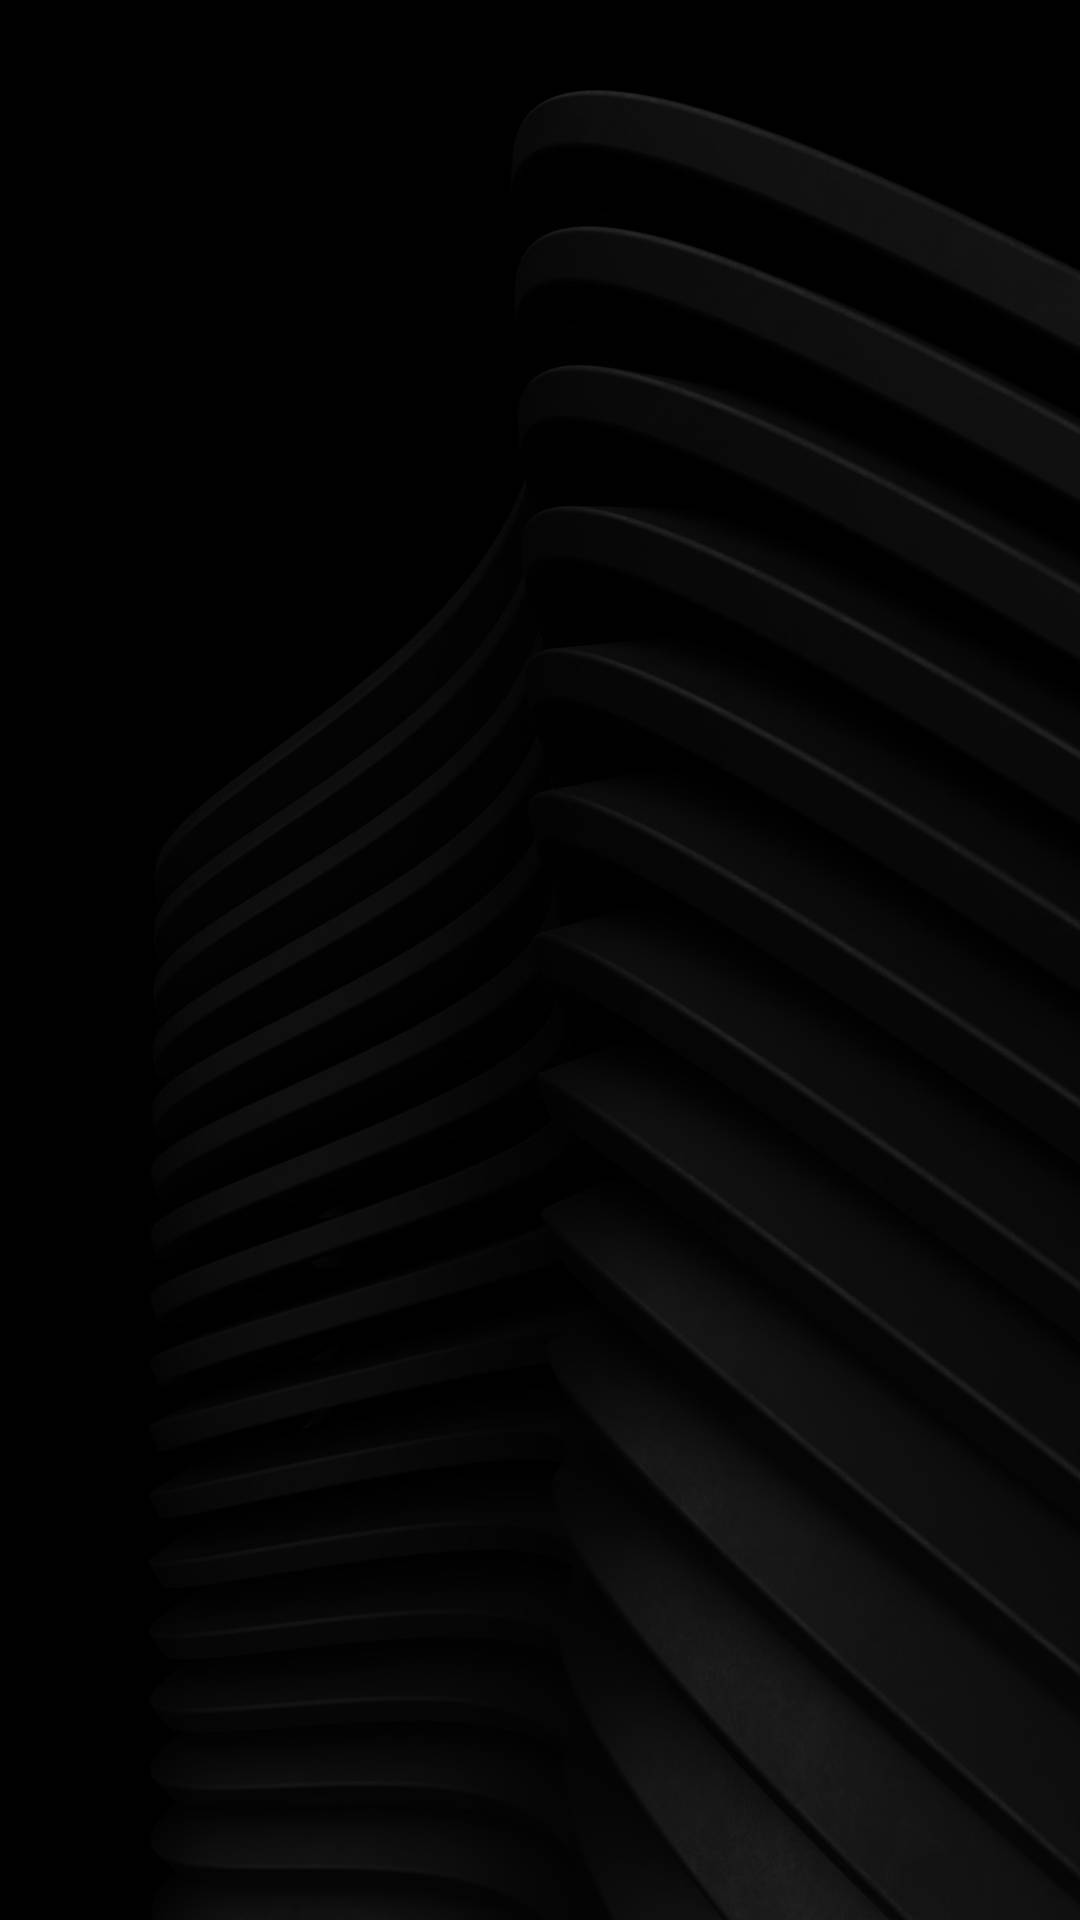 Black Aesthetic Tumblr Iphone Curved Abstract Wallpaper